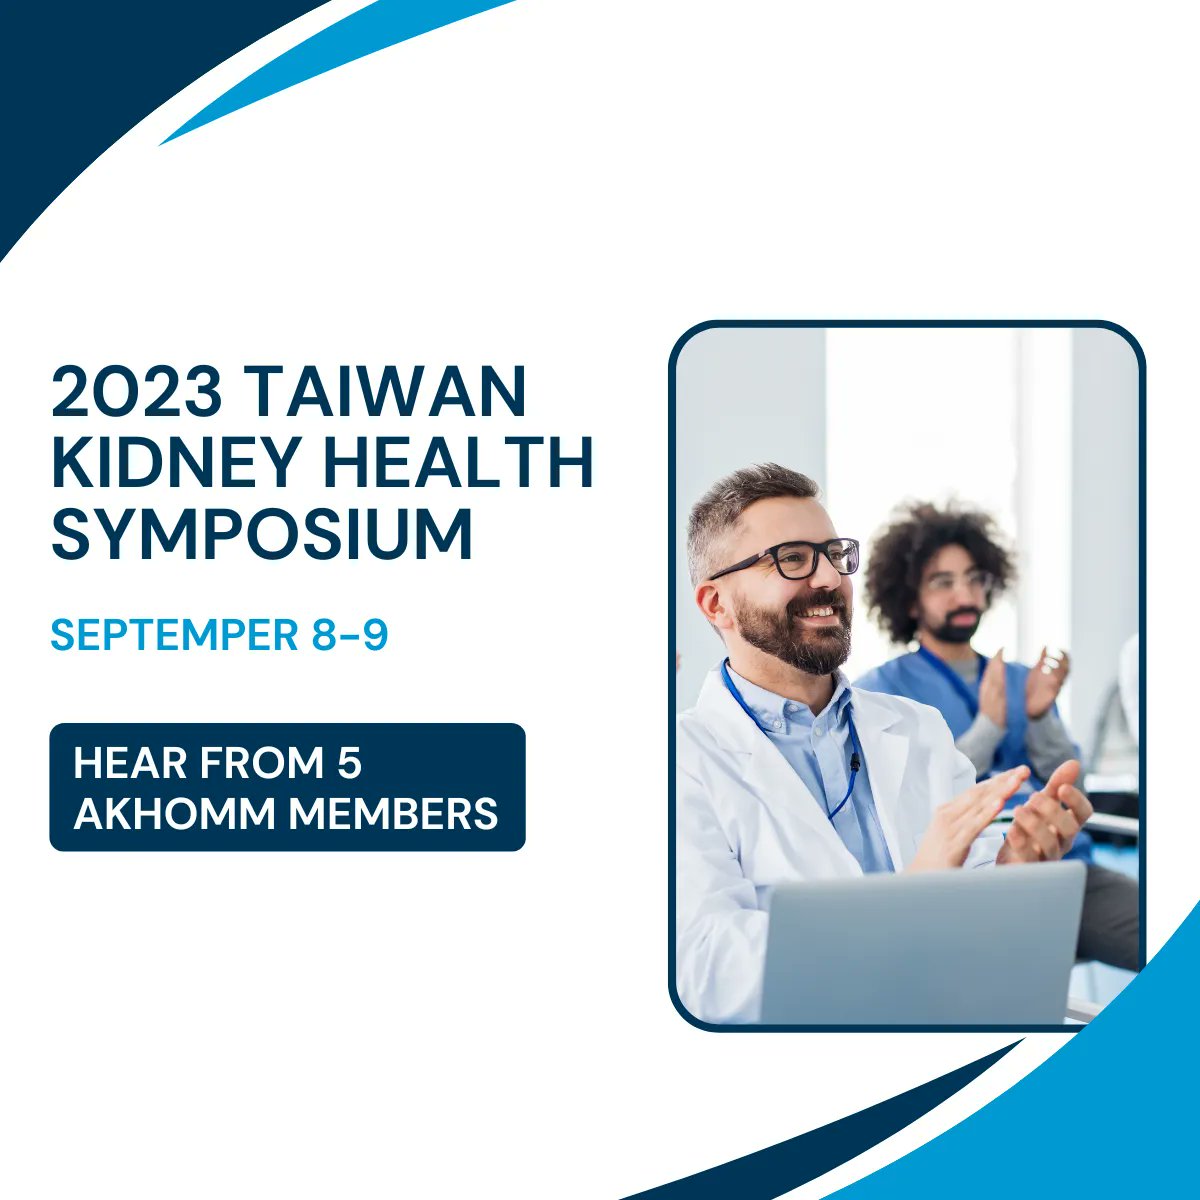 We hope you can join the 2023 Taiwan Kidney Health Symposium, where you can hear AKHOMM members discuss transforming medication management in patients with CKD! 🔗 Registration: buff.ly/3qHiBaE 🖱️ Check In: 6:30-6:55 PM CST ⏱️ Presentations: 6:55-10:00 PM CST